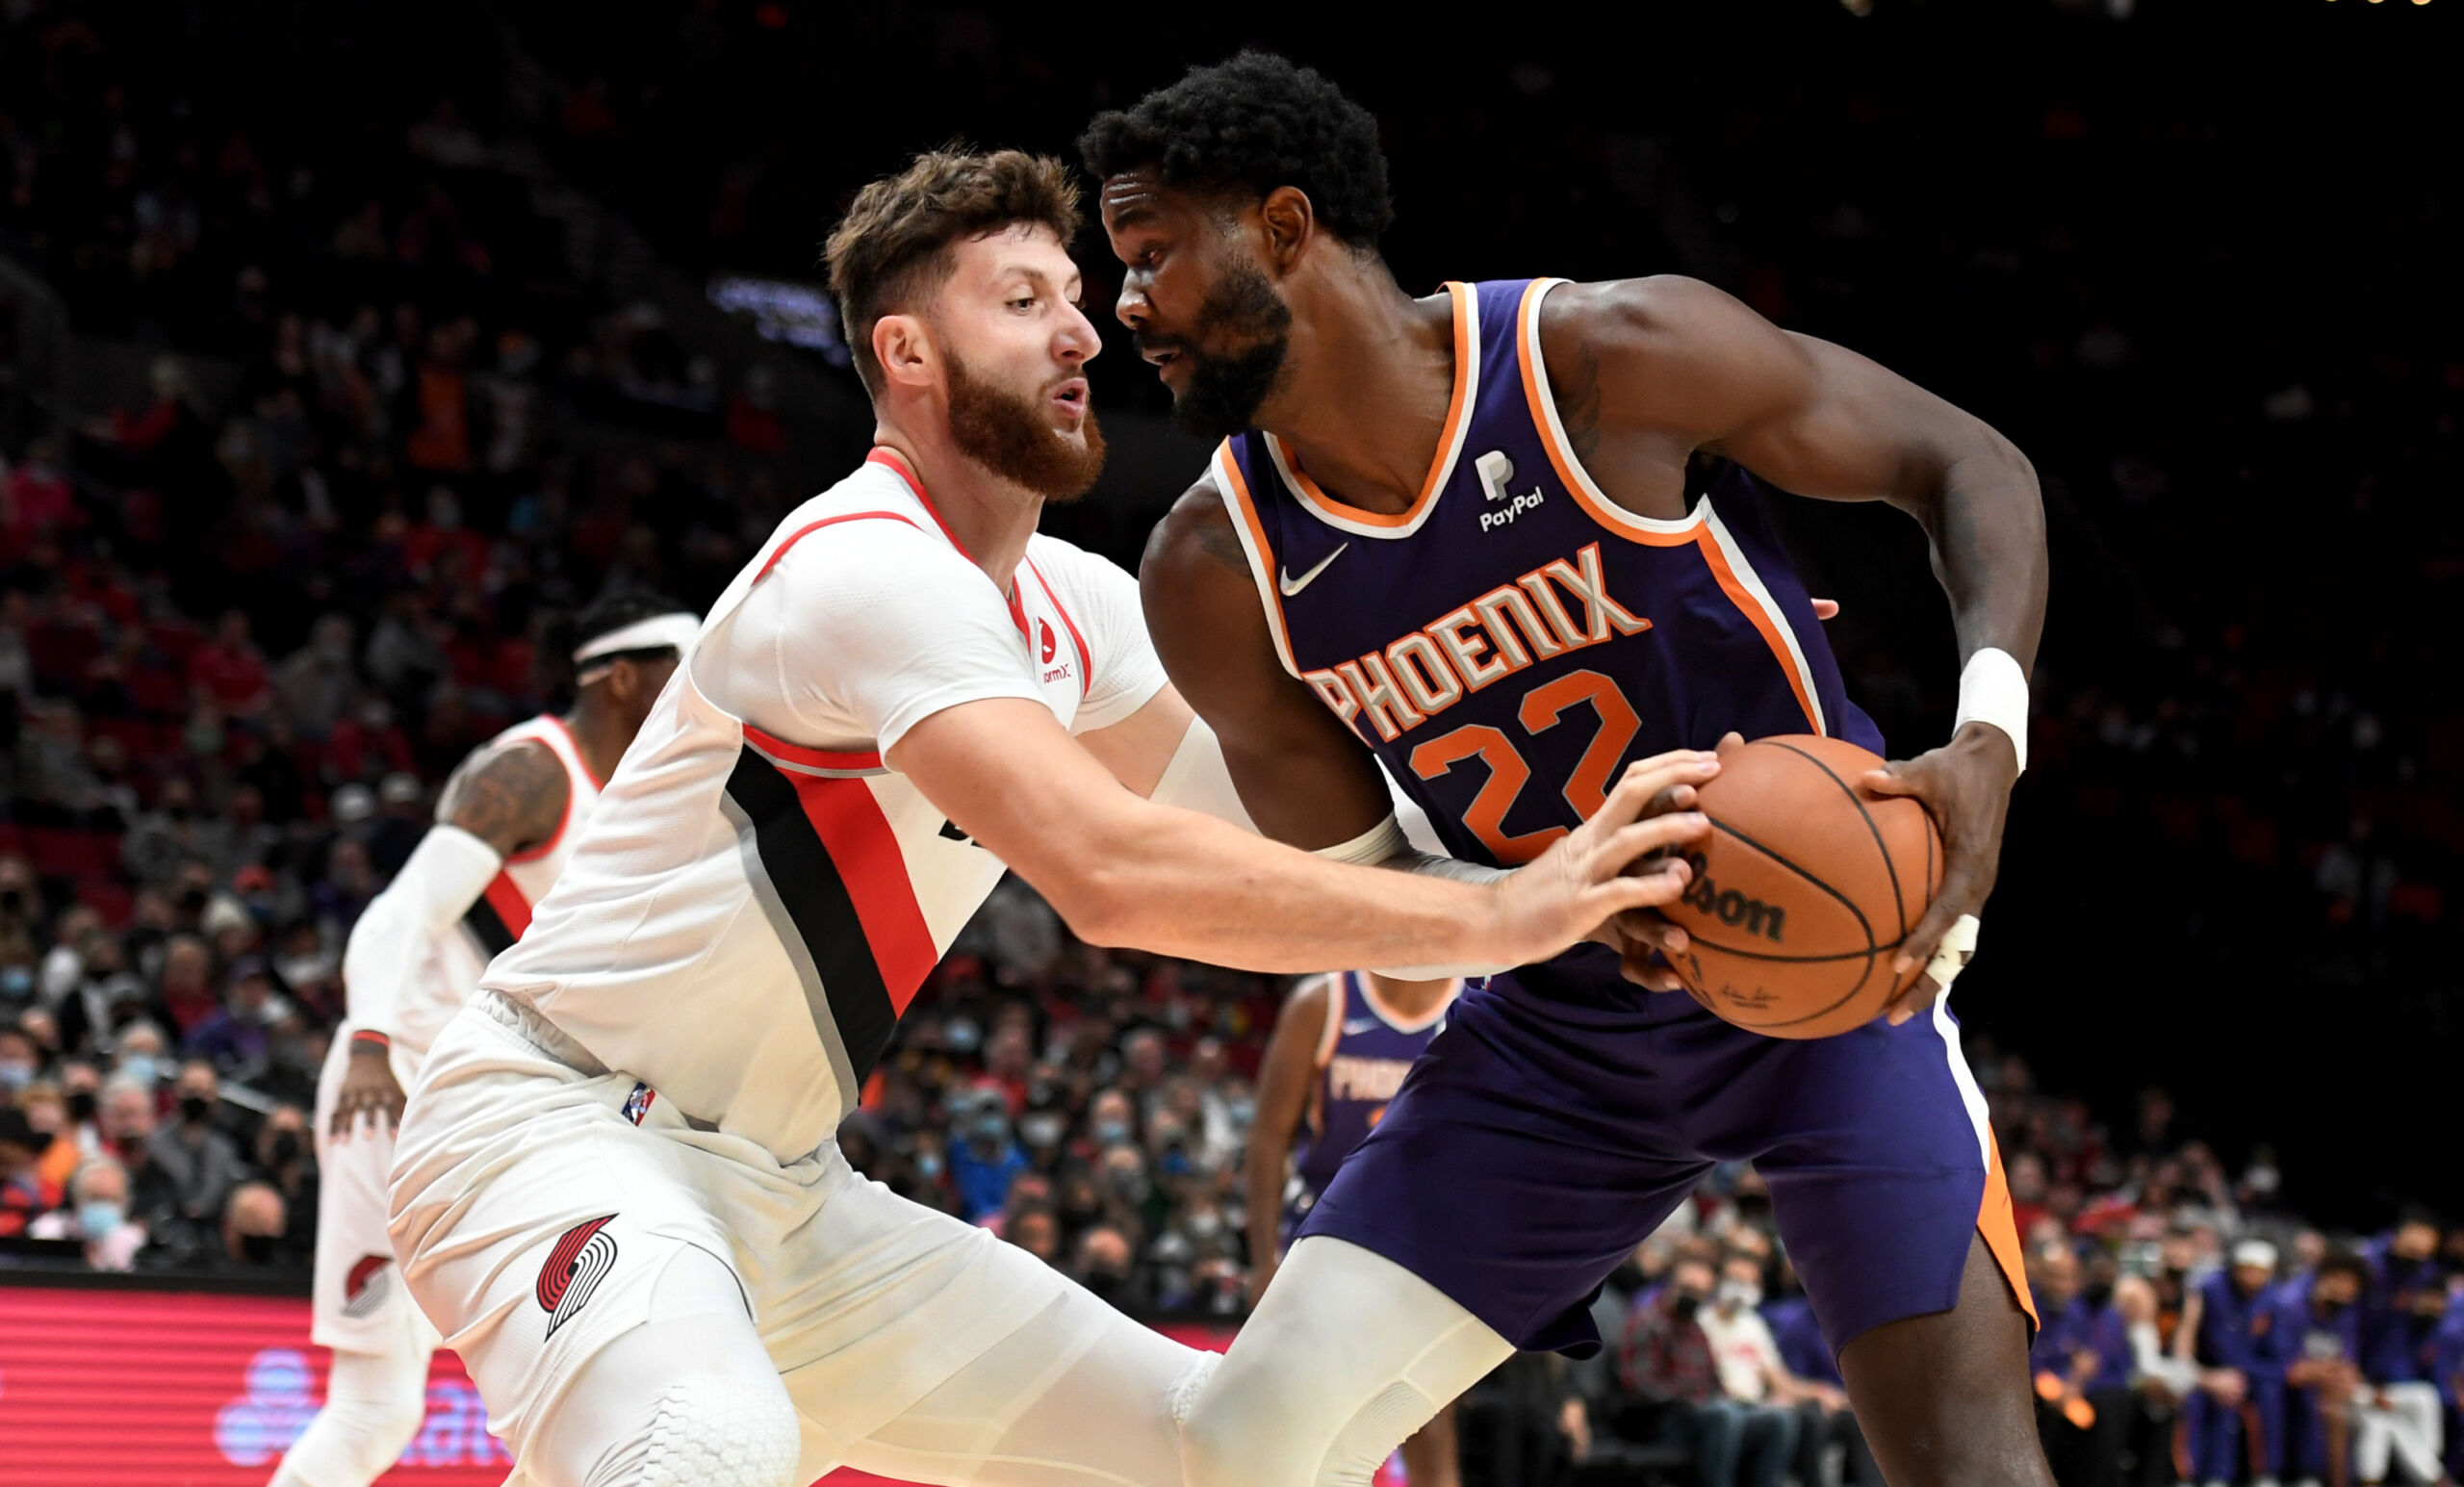 Preseason showed Suns fans the highs and lows of Jusuf Nurkic